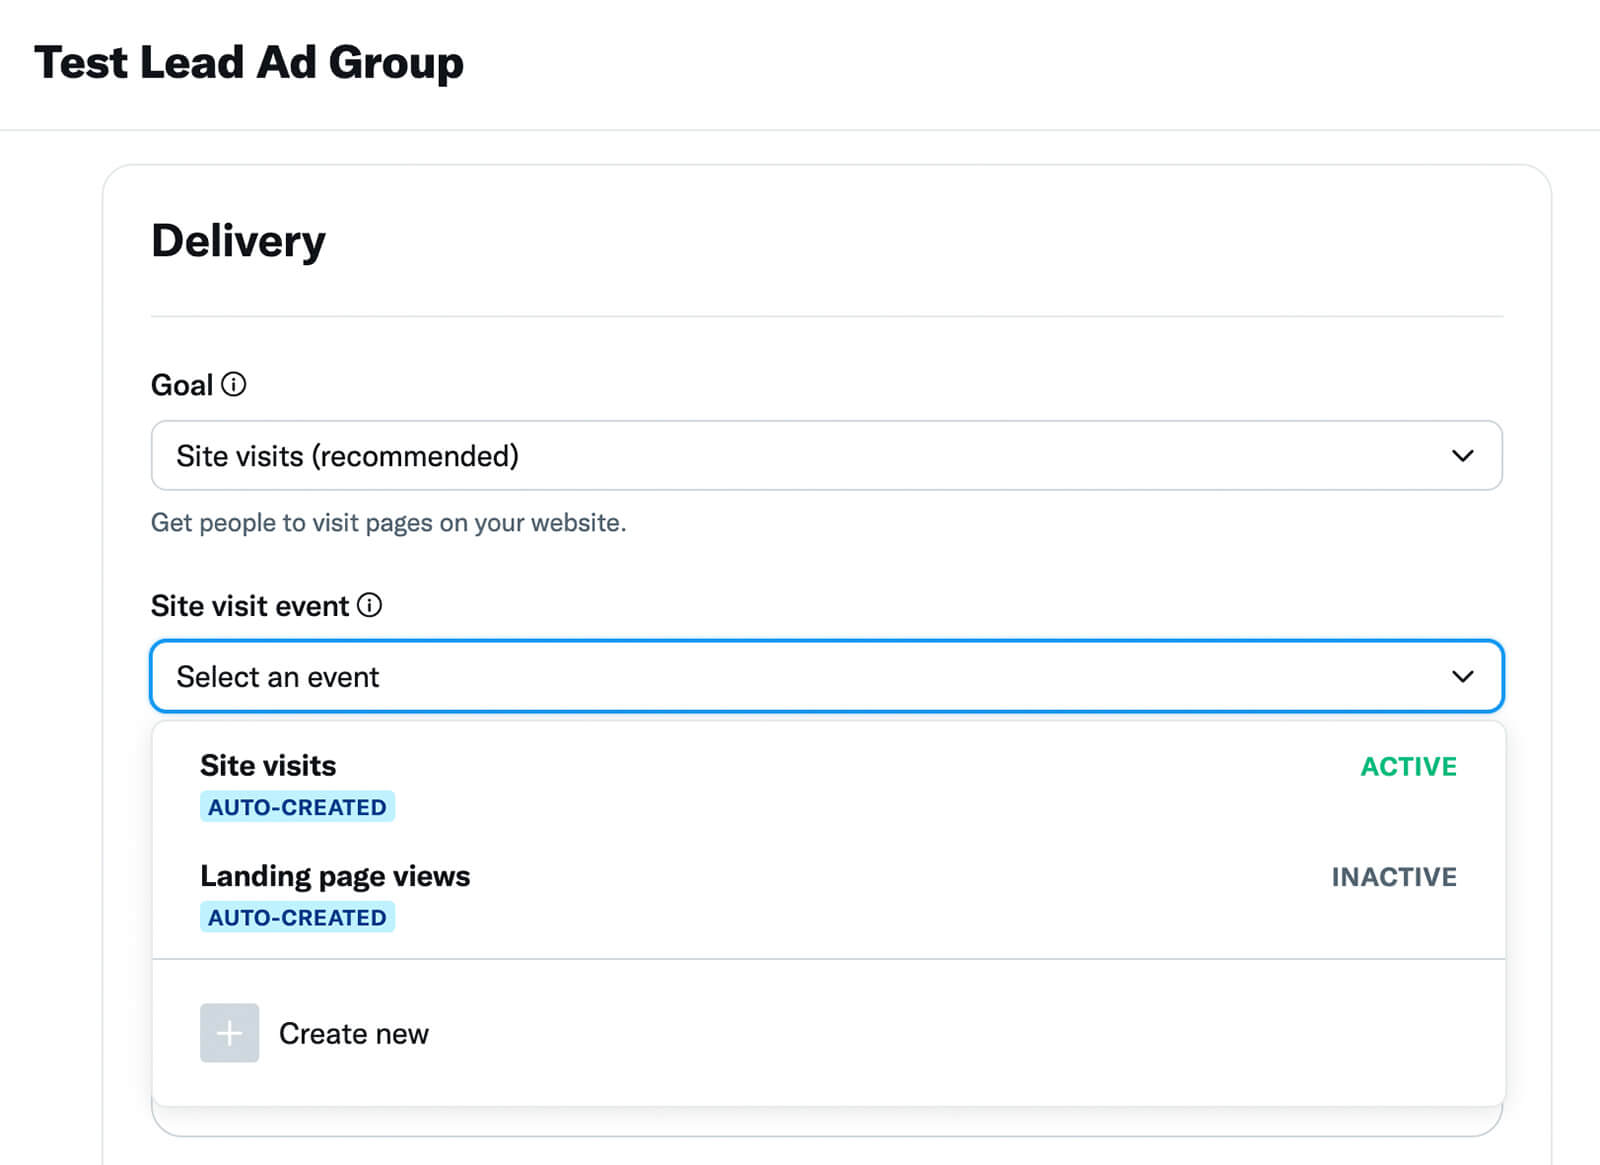 how-to-choose-a-campaign-objective-and-an-ad-group-goal-using-twitter-pixel-site-visits-as-goal-test-lead-ad-group-example-18